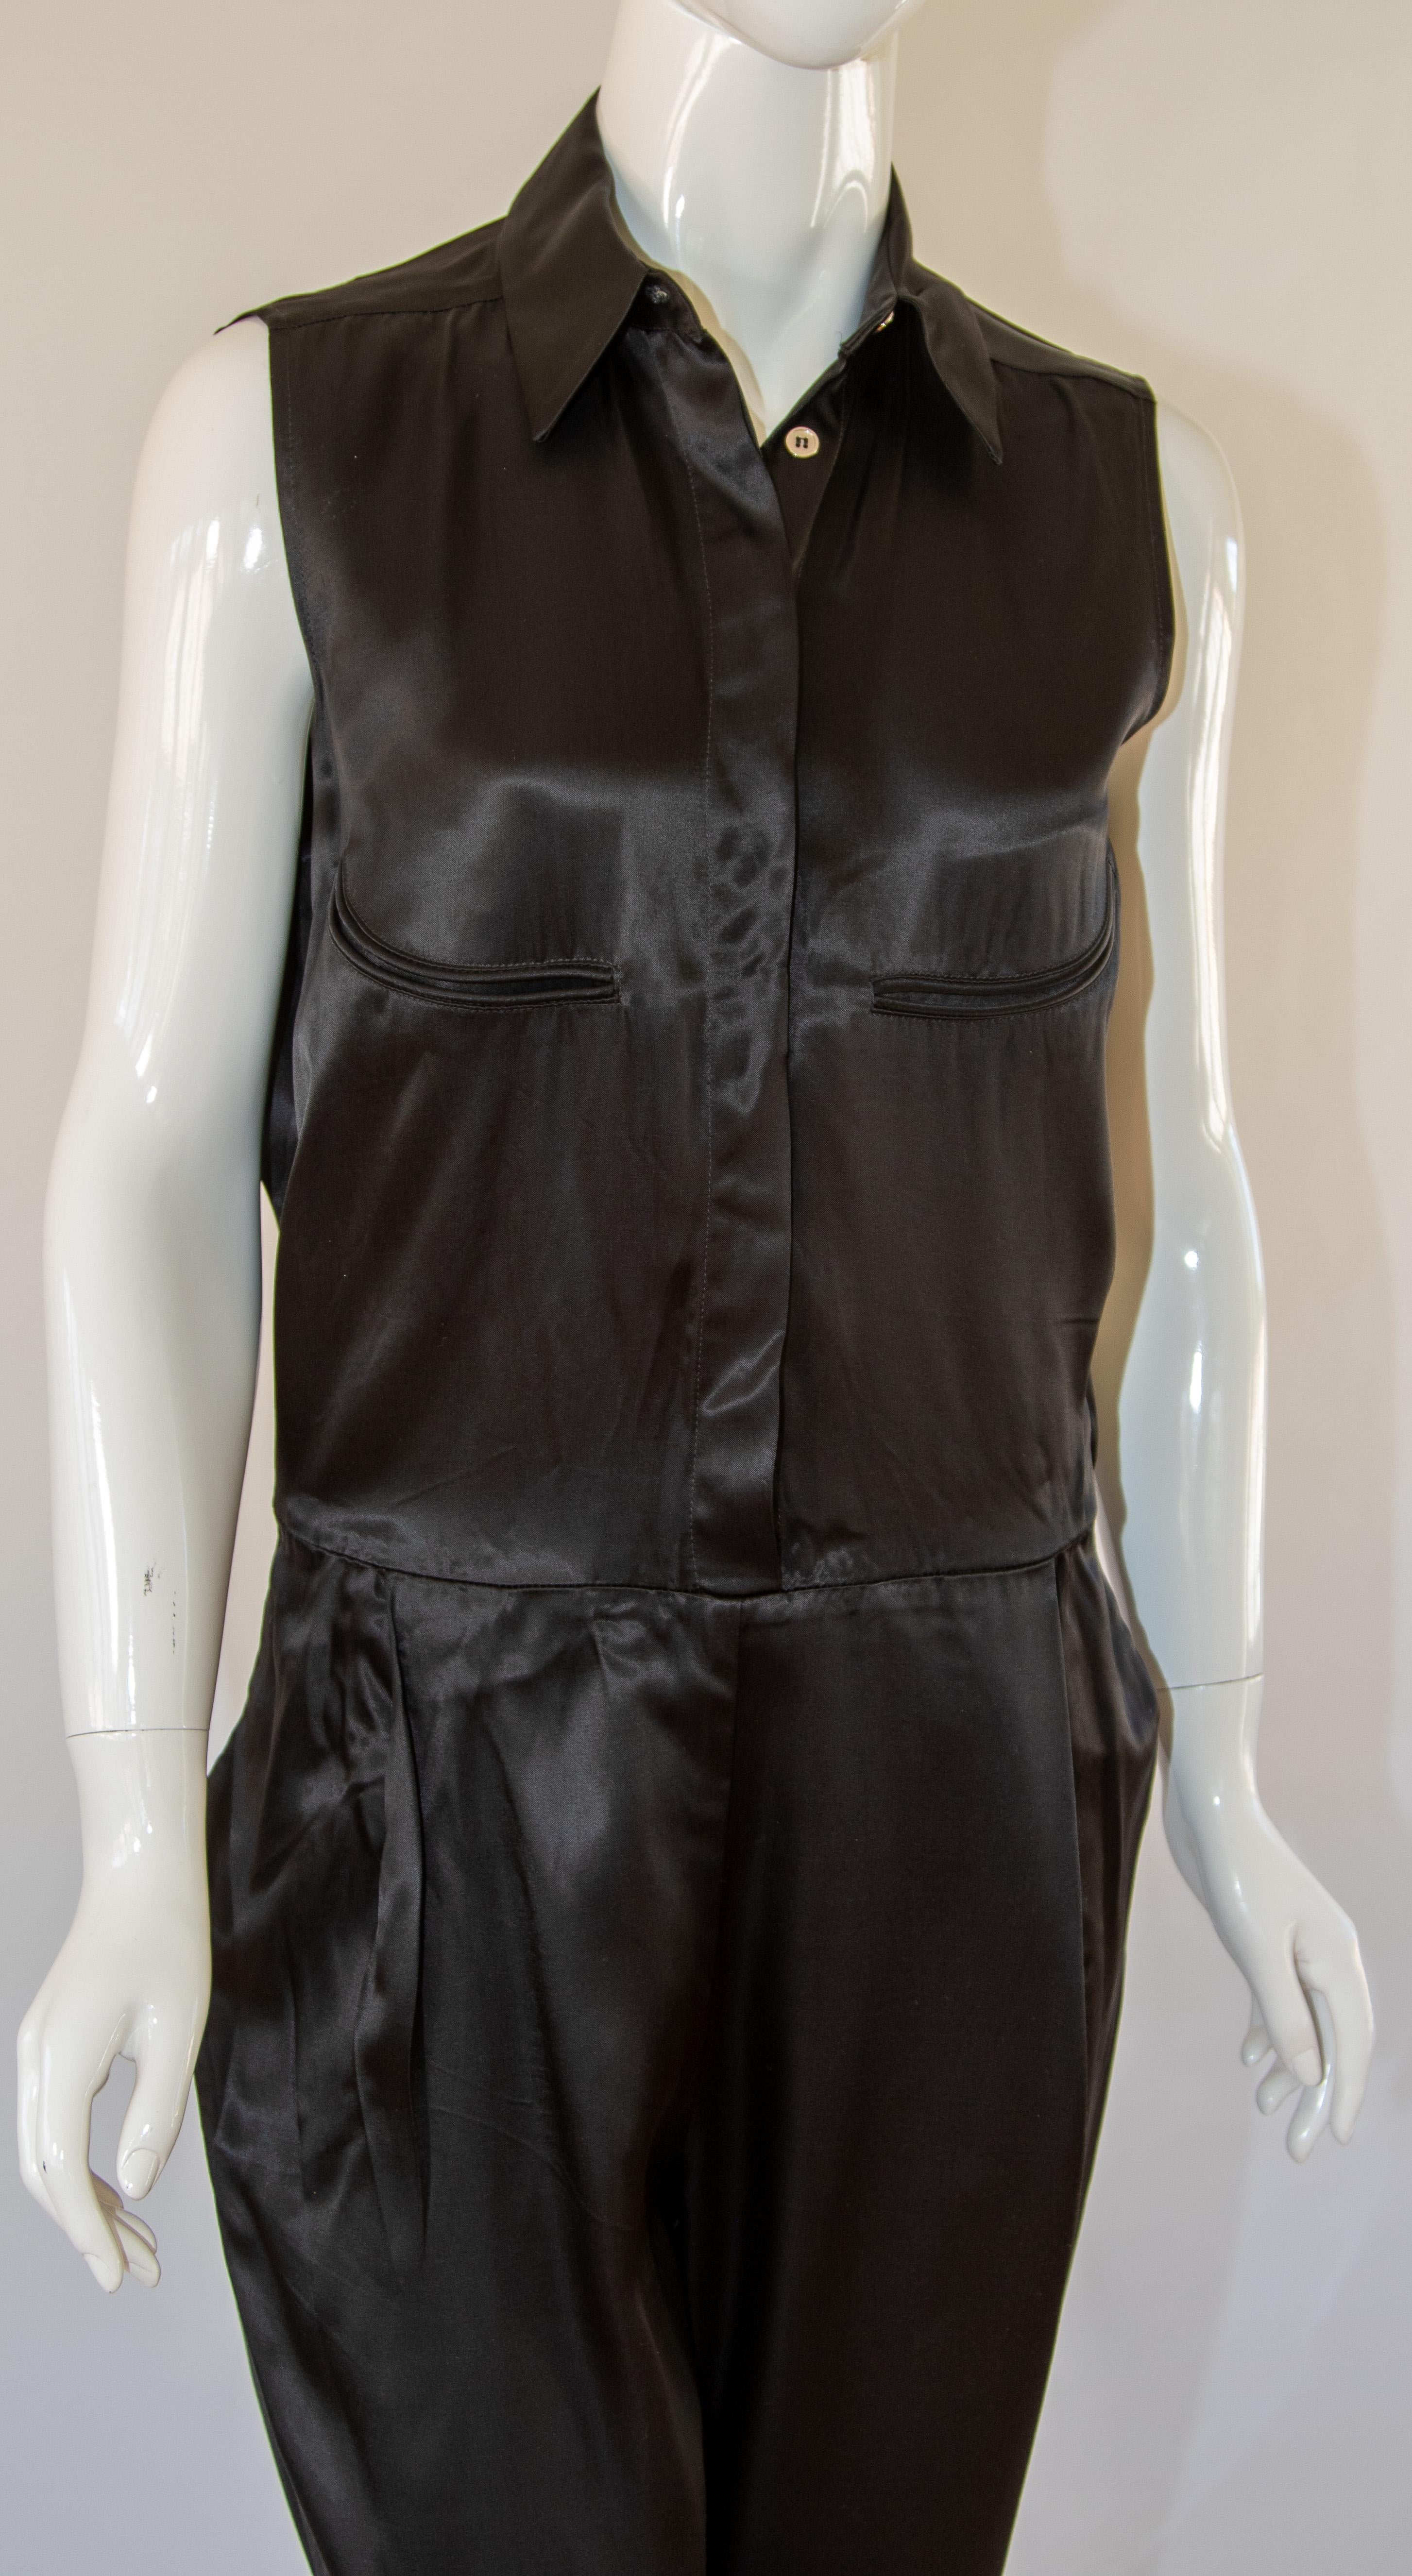 Maison Martin Margiela Black Satin Jumpsuit sleeveless Tie back In New Condition For Sale In North Hollywood, CA